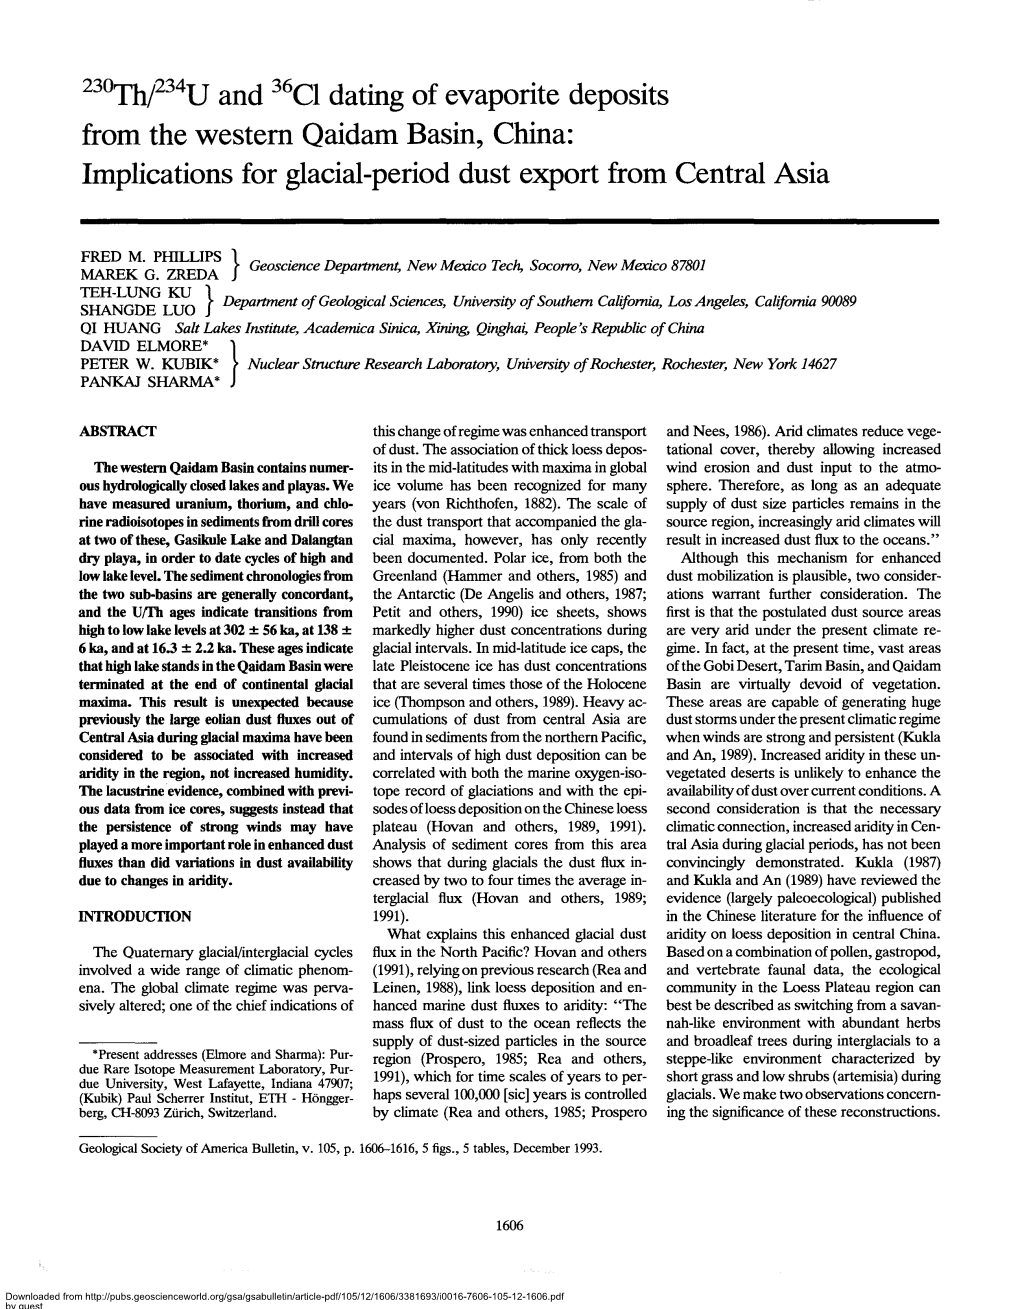 From the Western Qaidam Basin, China: Implications for Glacial-Period Dust Export from Central Asia